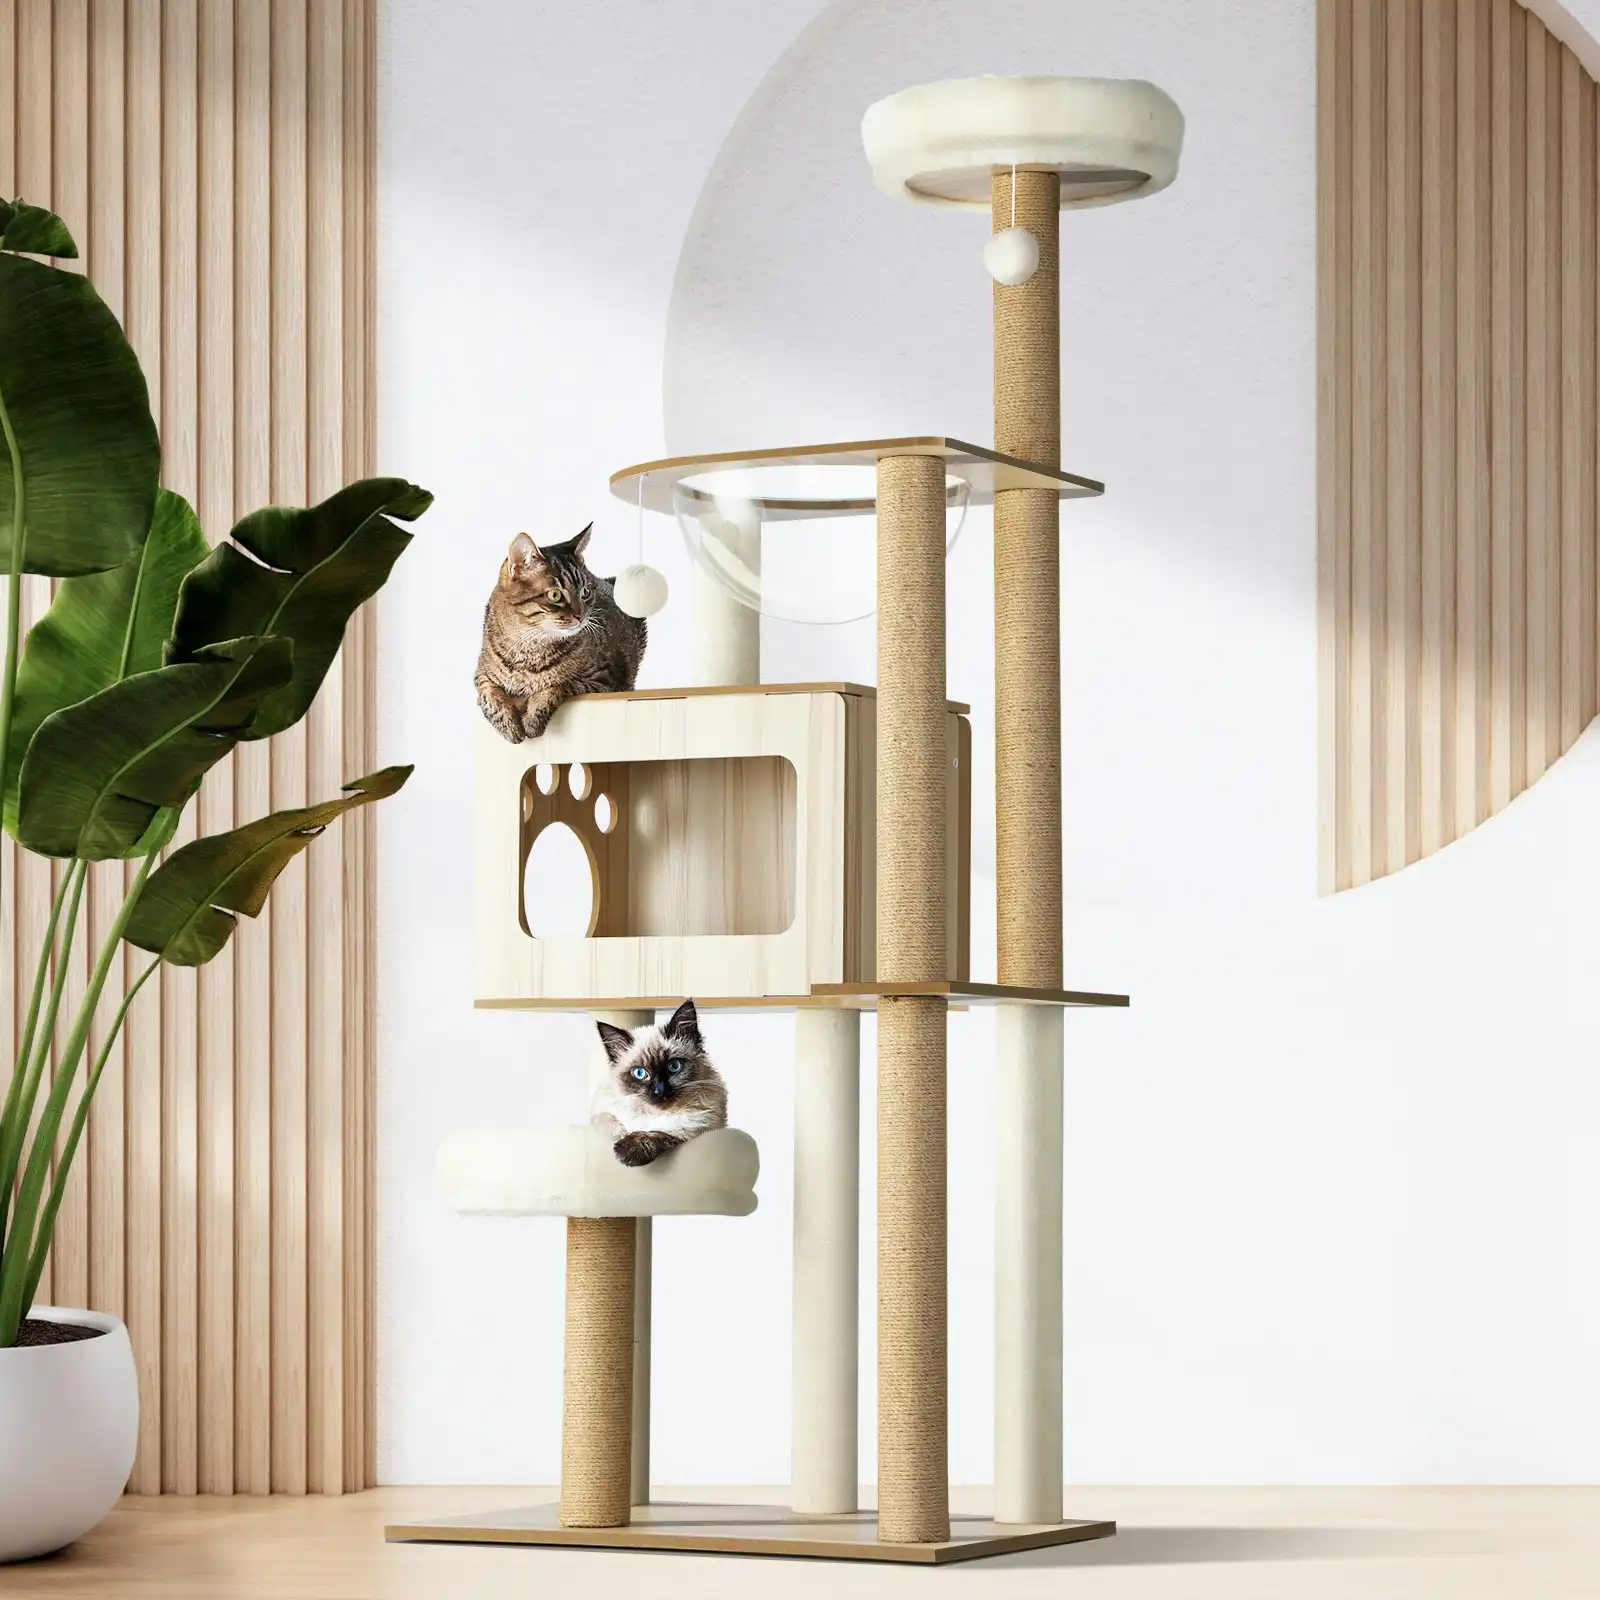 Alopet Cat Tree Tower Scratching Post Scratcher Cats Condo House Bed Furniture